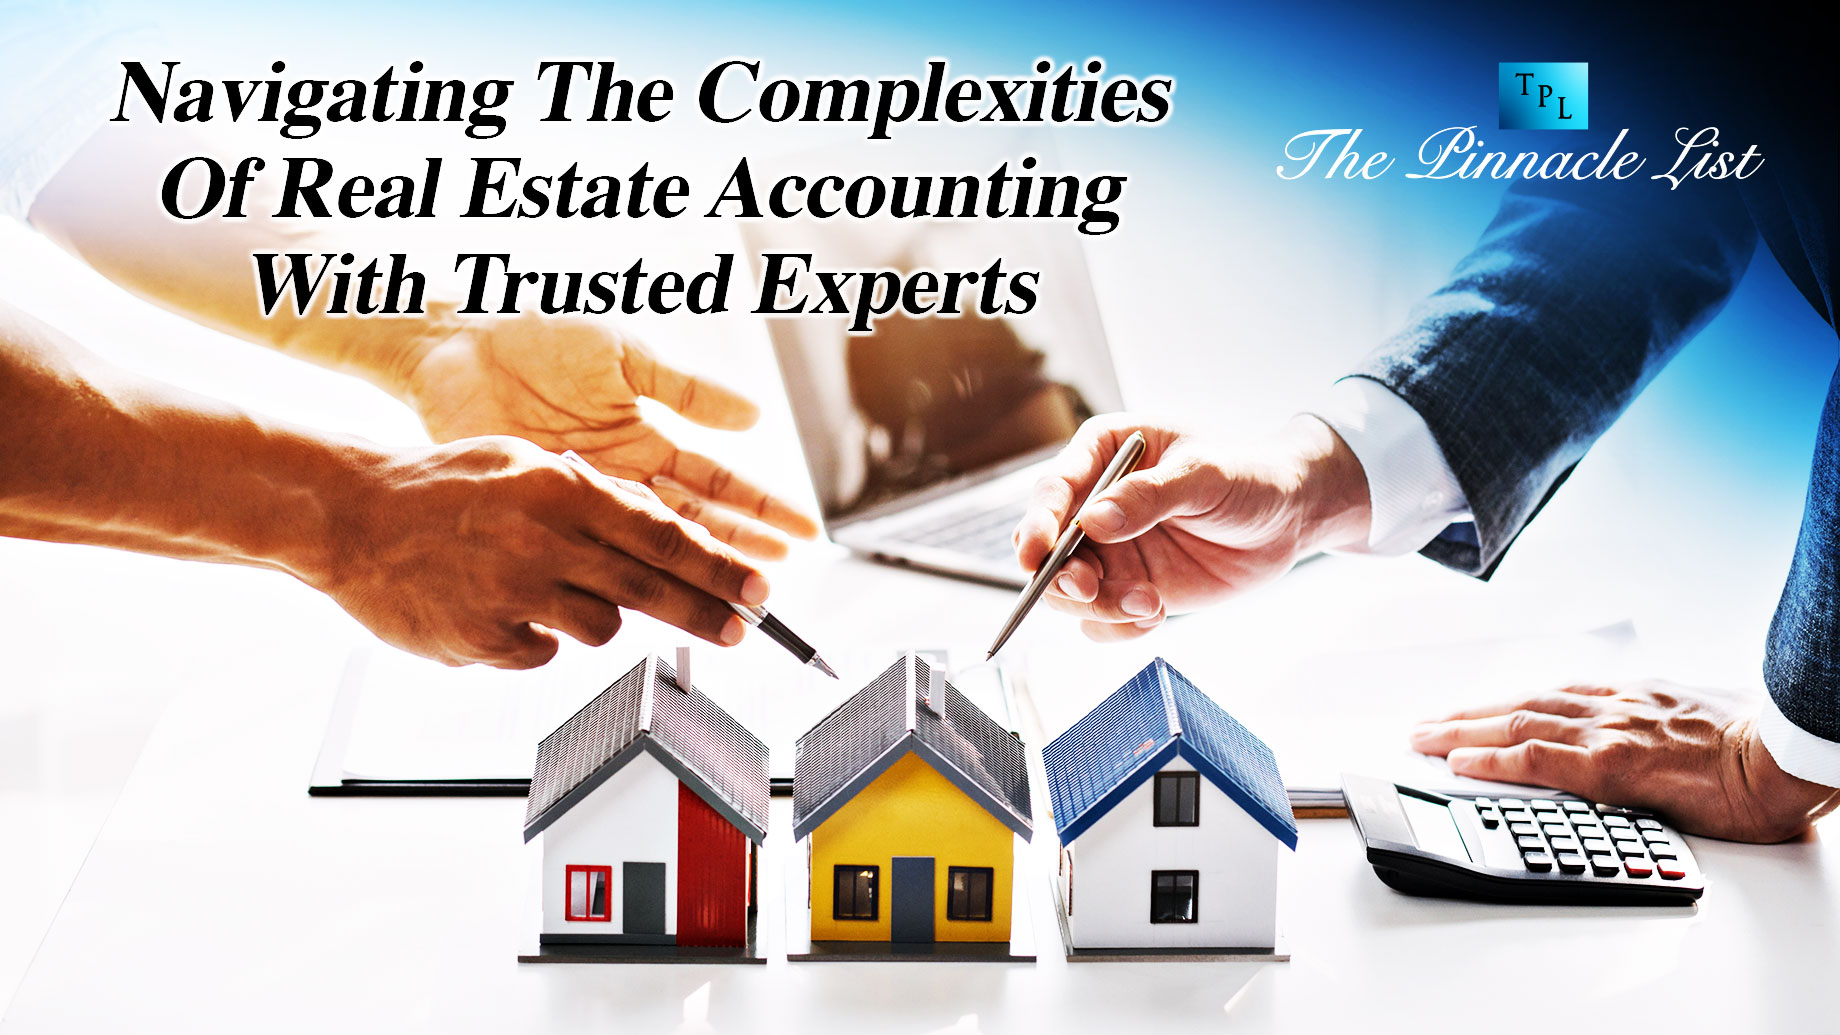 Navigating The Complexities Of Real Estate Accounting With Trusted Experts